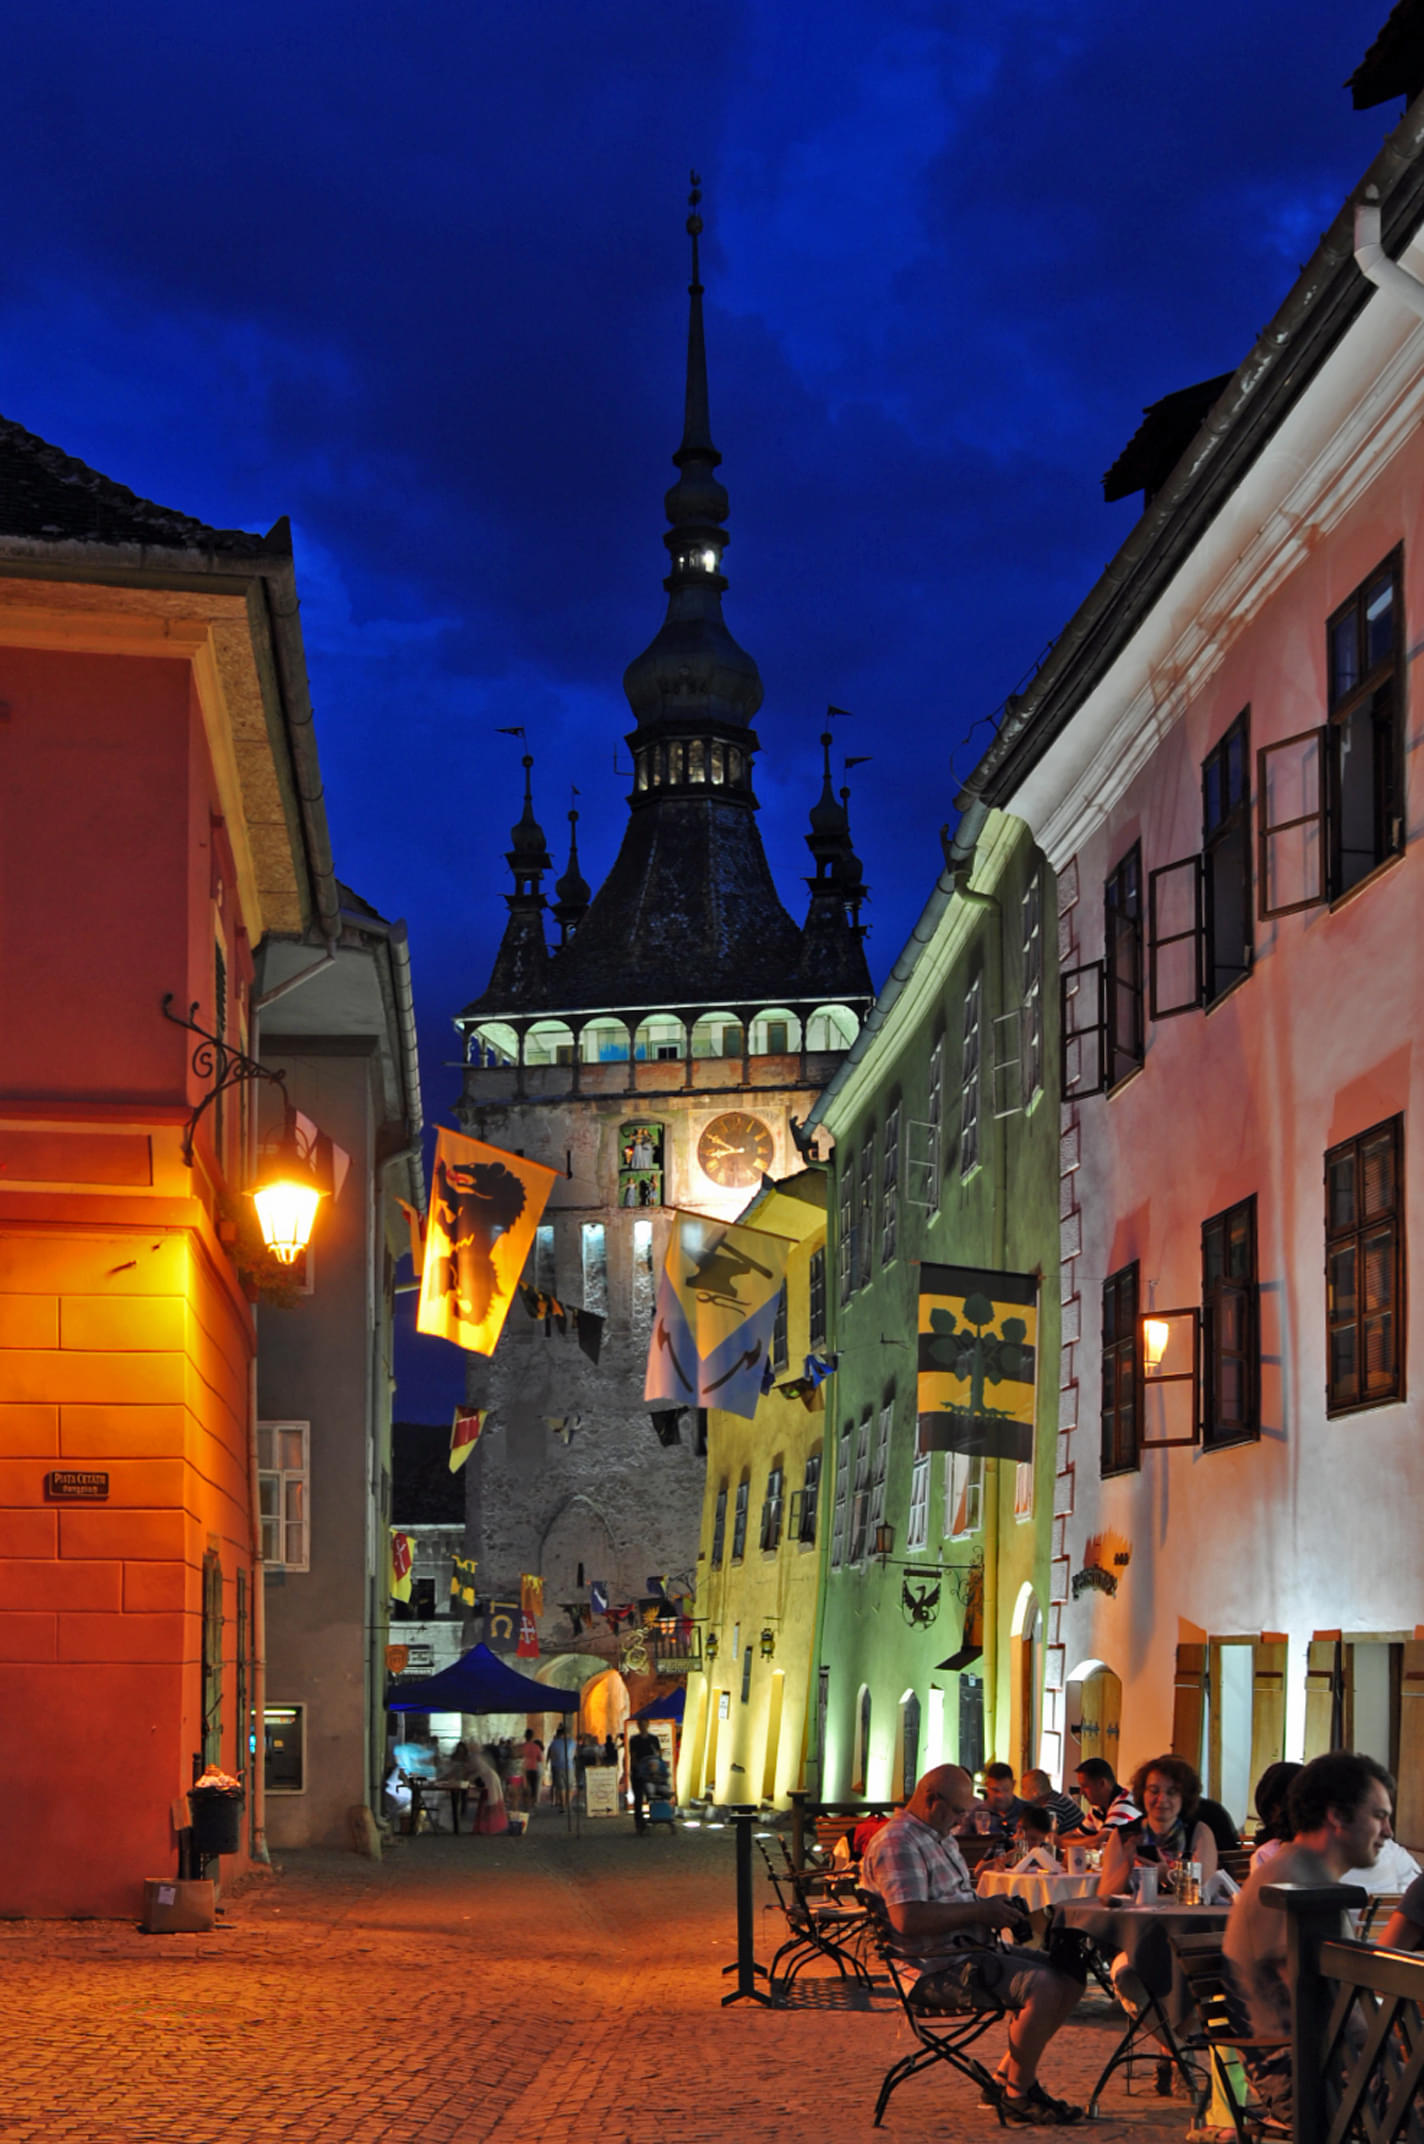 Sighisoara Historic Centre Overview